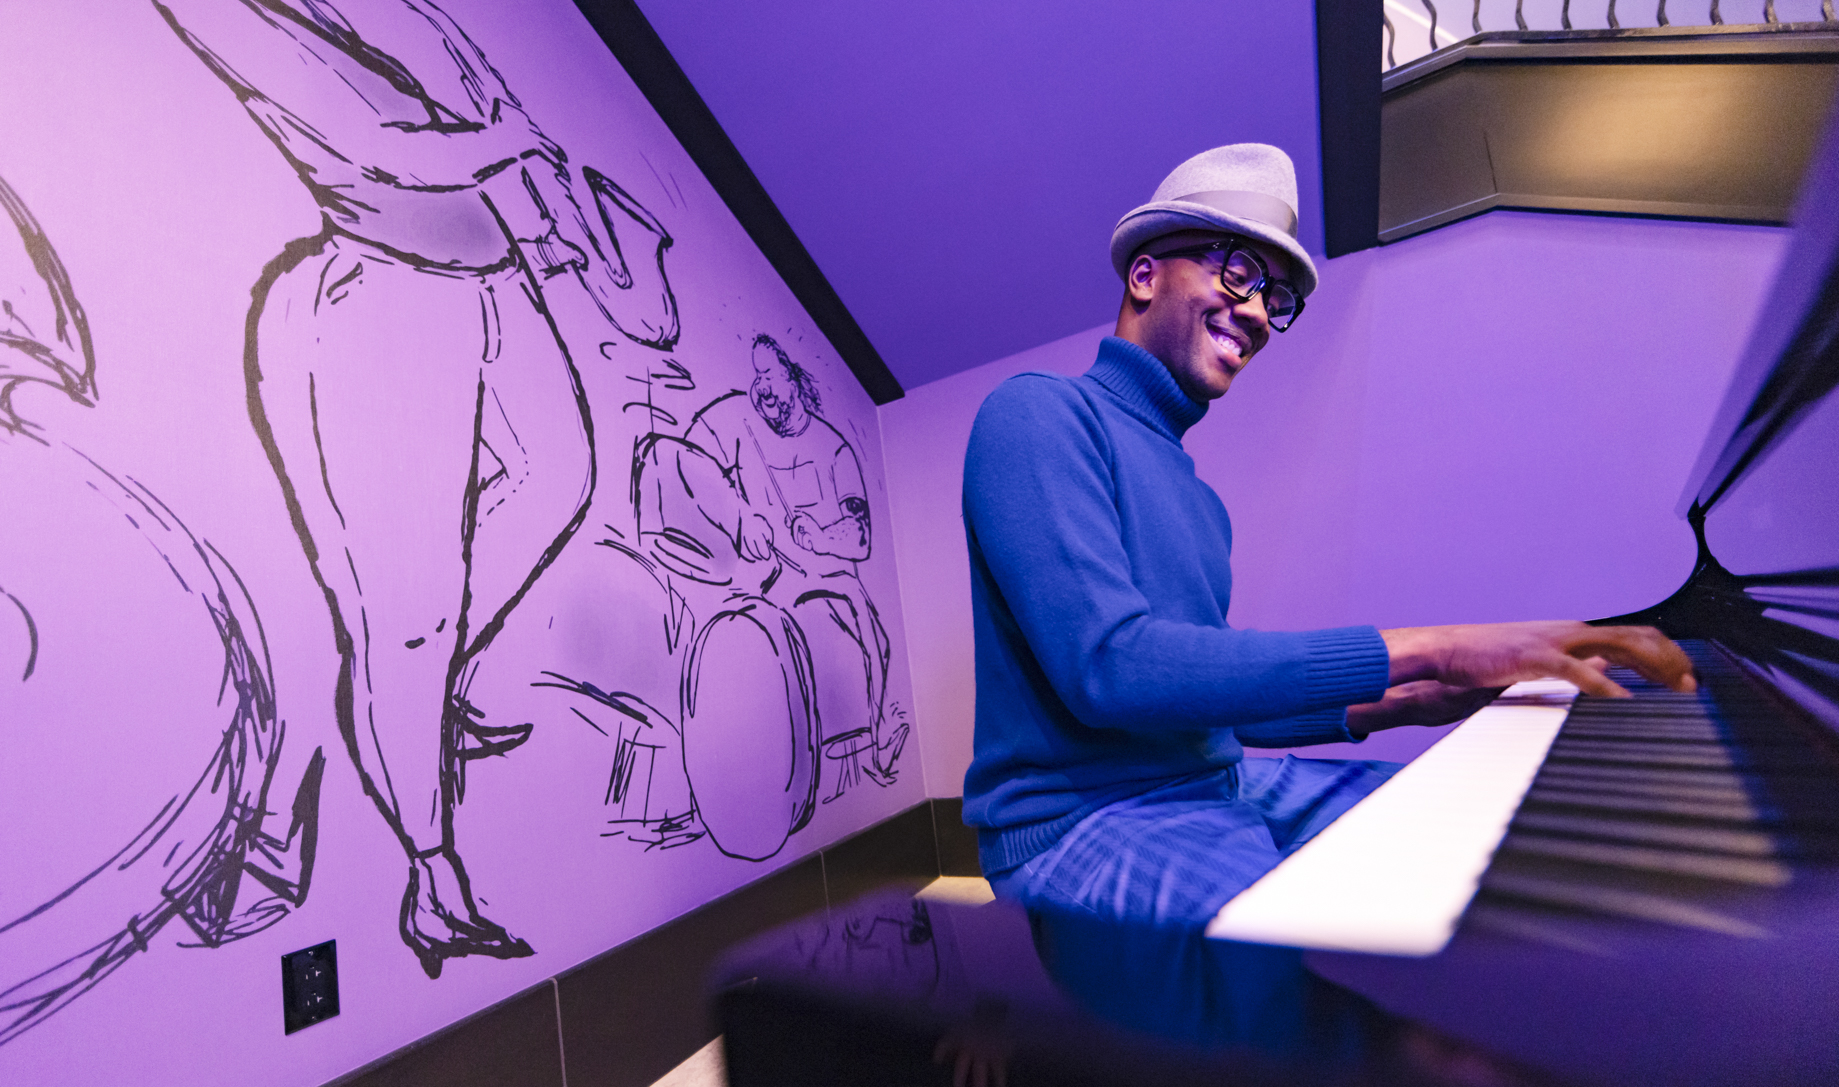 At select times, Joe Gardner from Pixar’s “Soul” drops by the hotel lobby to play piano for passing guests at Pixar Place Hotel at Disneyland Resort in Anaheim, Calif. Joe Gardner gets lost in the music surrounded by deep purple walls and drawings of jazz musicians and counselors from “The Great Before.” (Christian Thompson/Disneyland Resort)